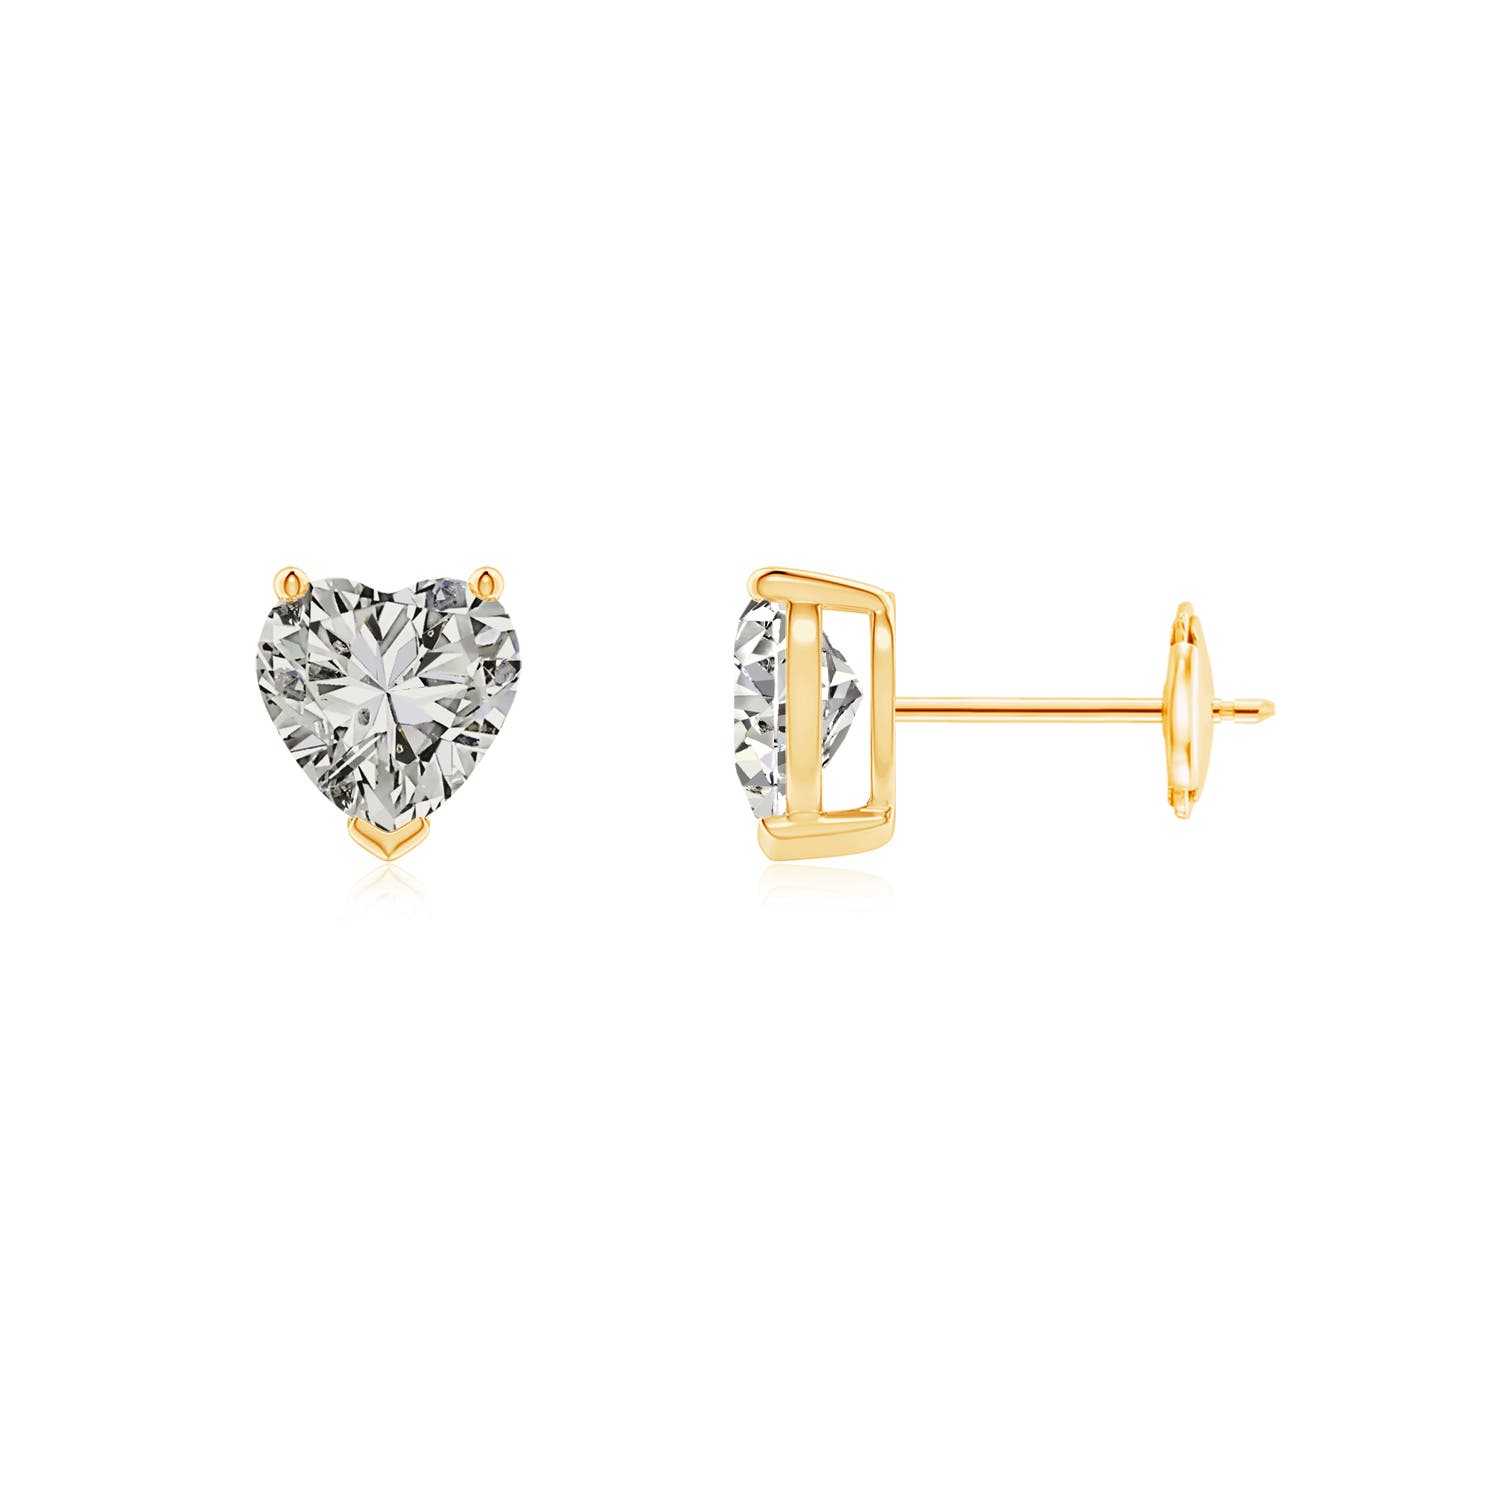 K, I3 / 1.5 CT / 14 KT Yellow Gold